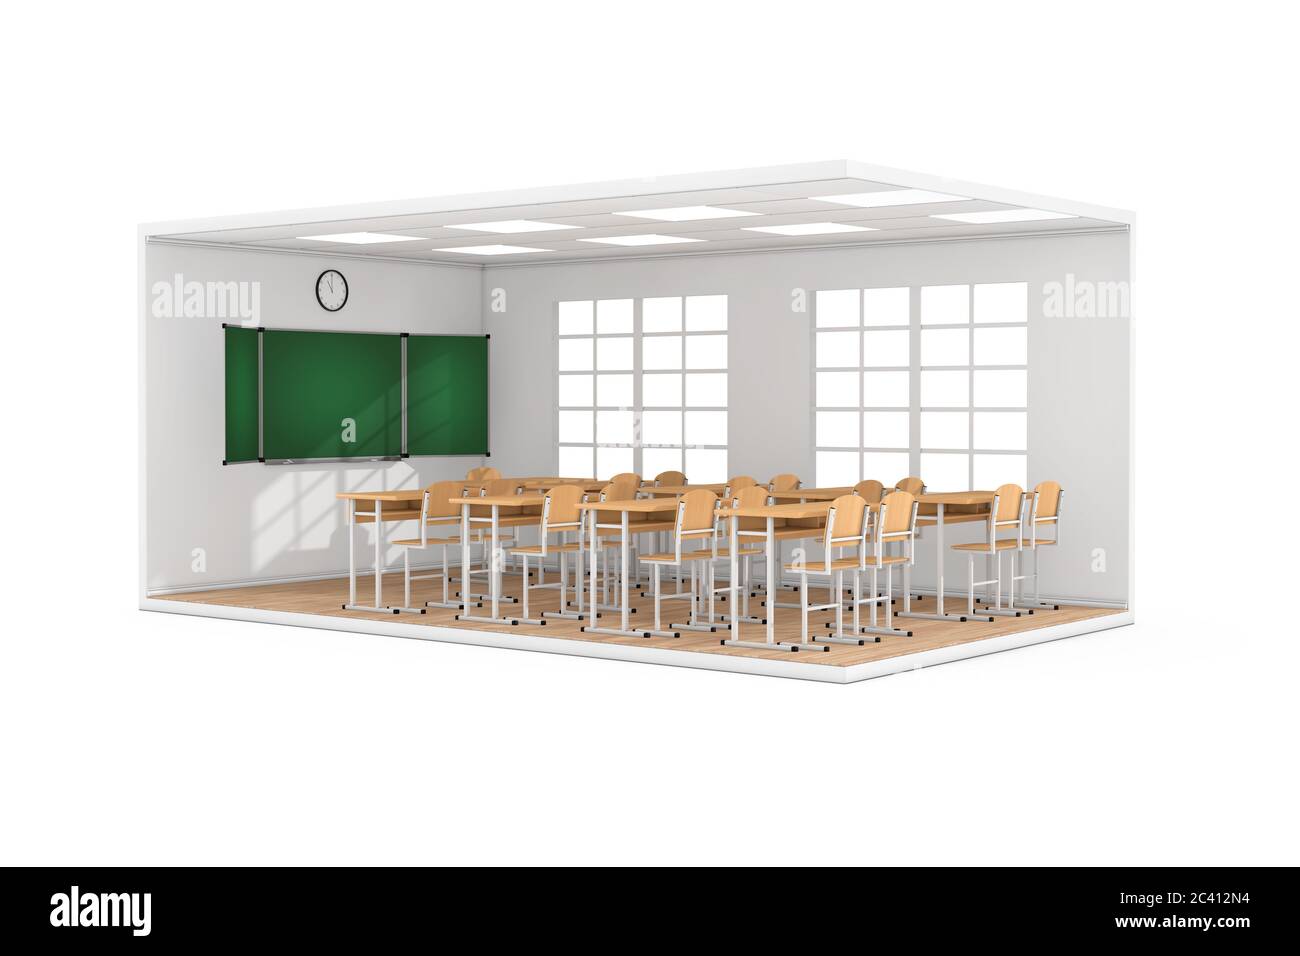 School Classroom Interior with Large Window, School Desks, Chairs, Blackboard and Wooden Parquet Floor on a white background. 3d Rendering Stock Photo